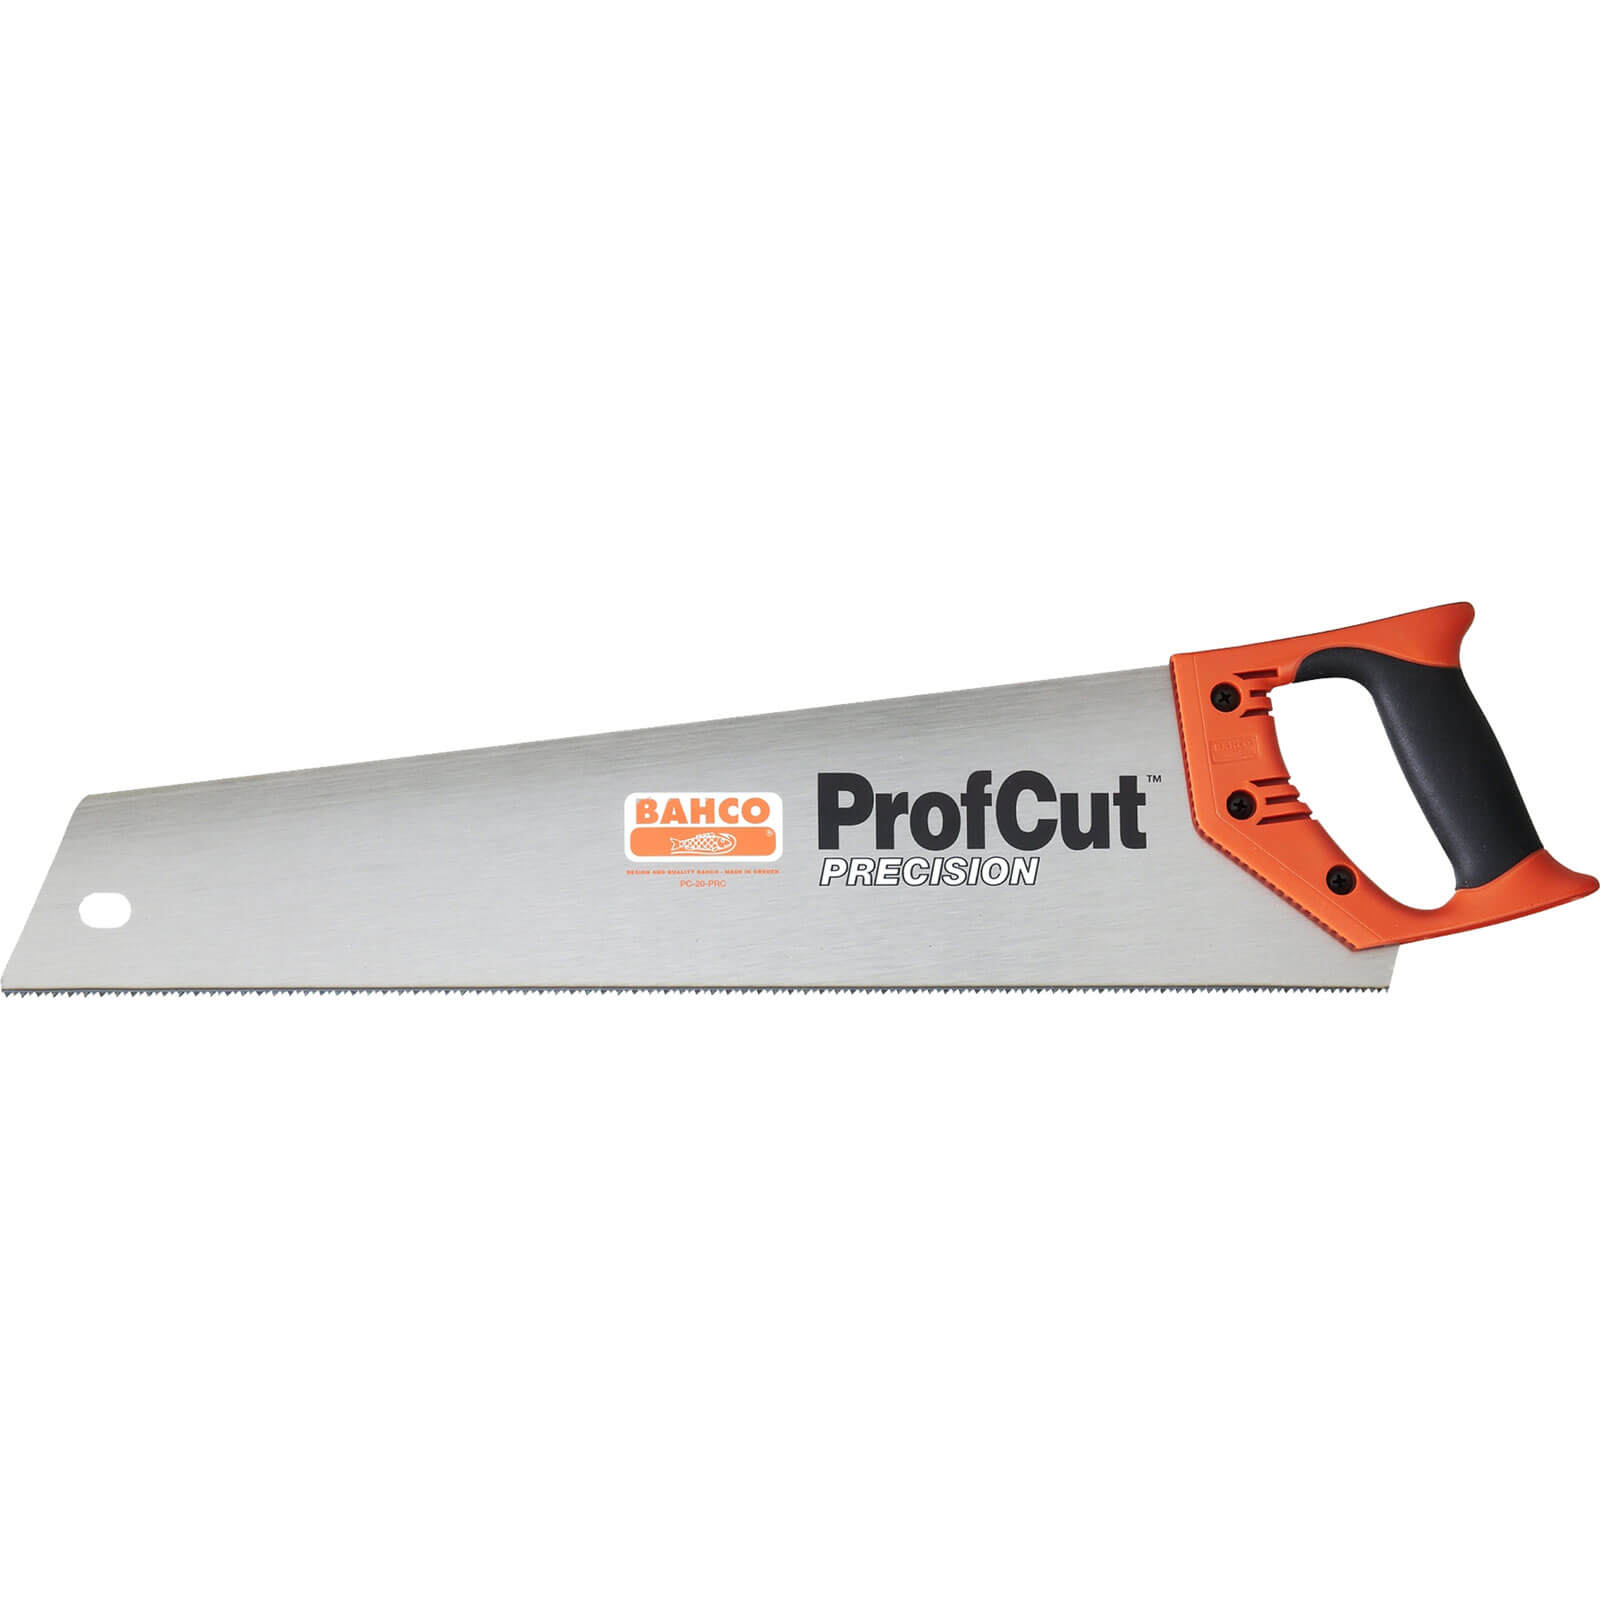 Image of Bahco ProfCut Precision Hand Saw 20" / 500mm 9tpi